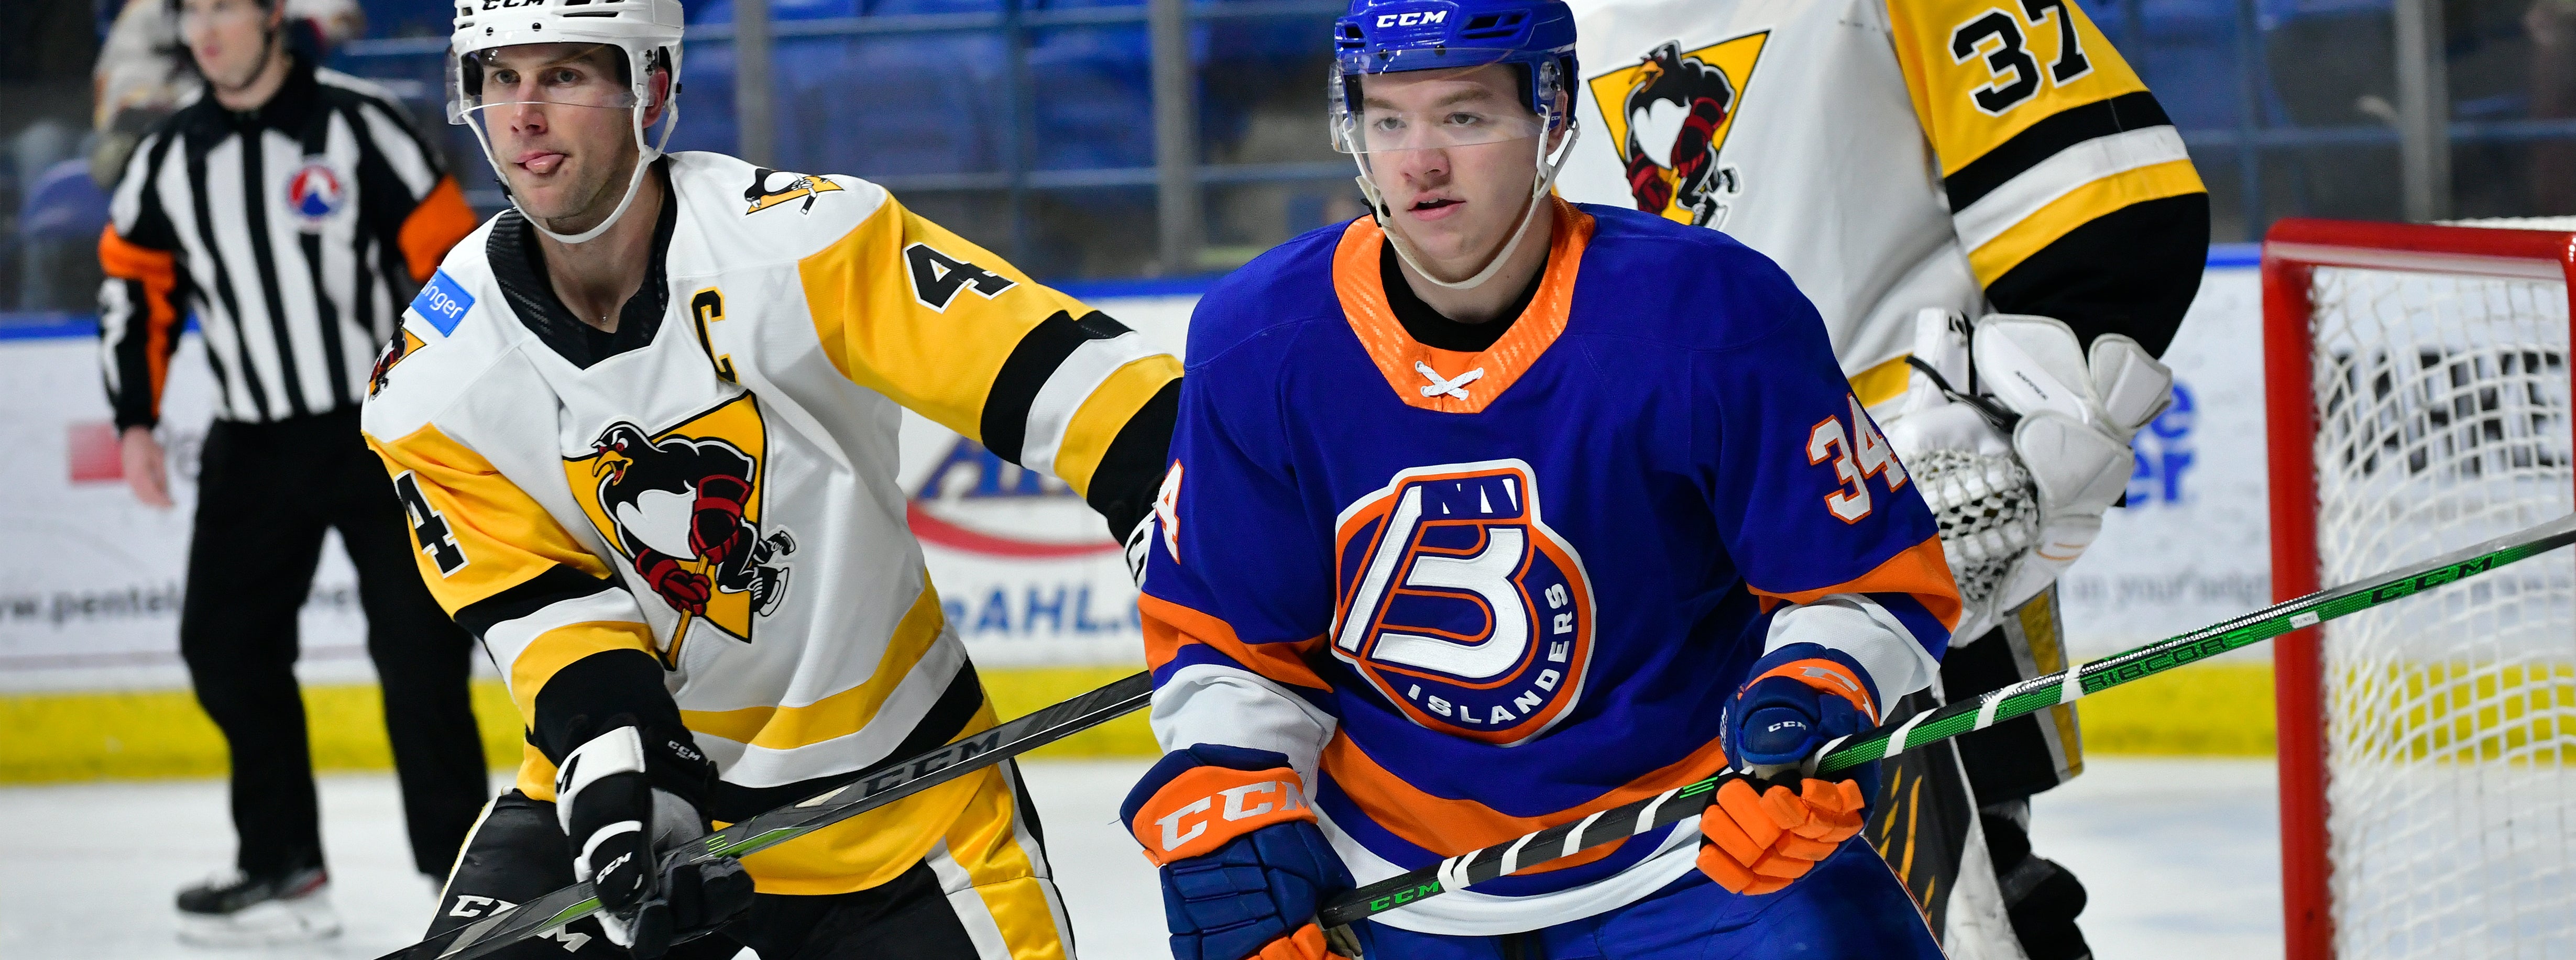 Islanders Face Penguins, Checkers at Home